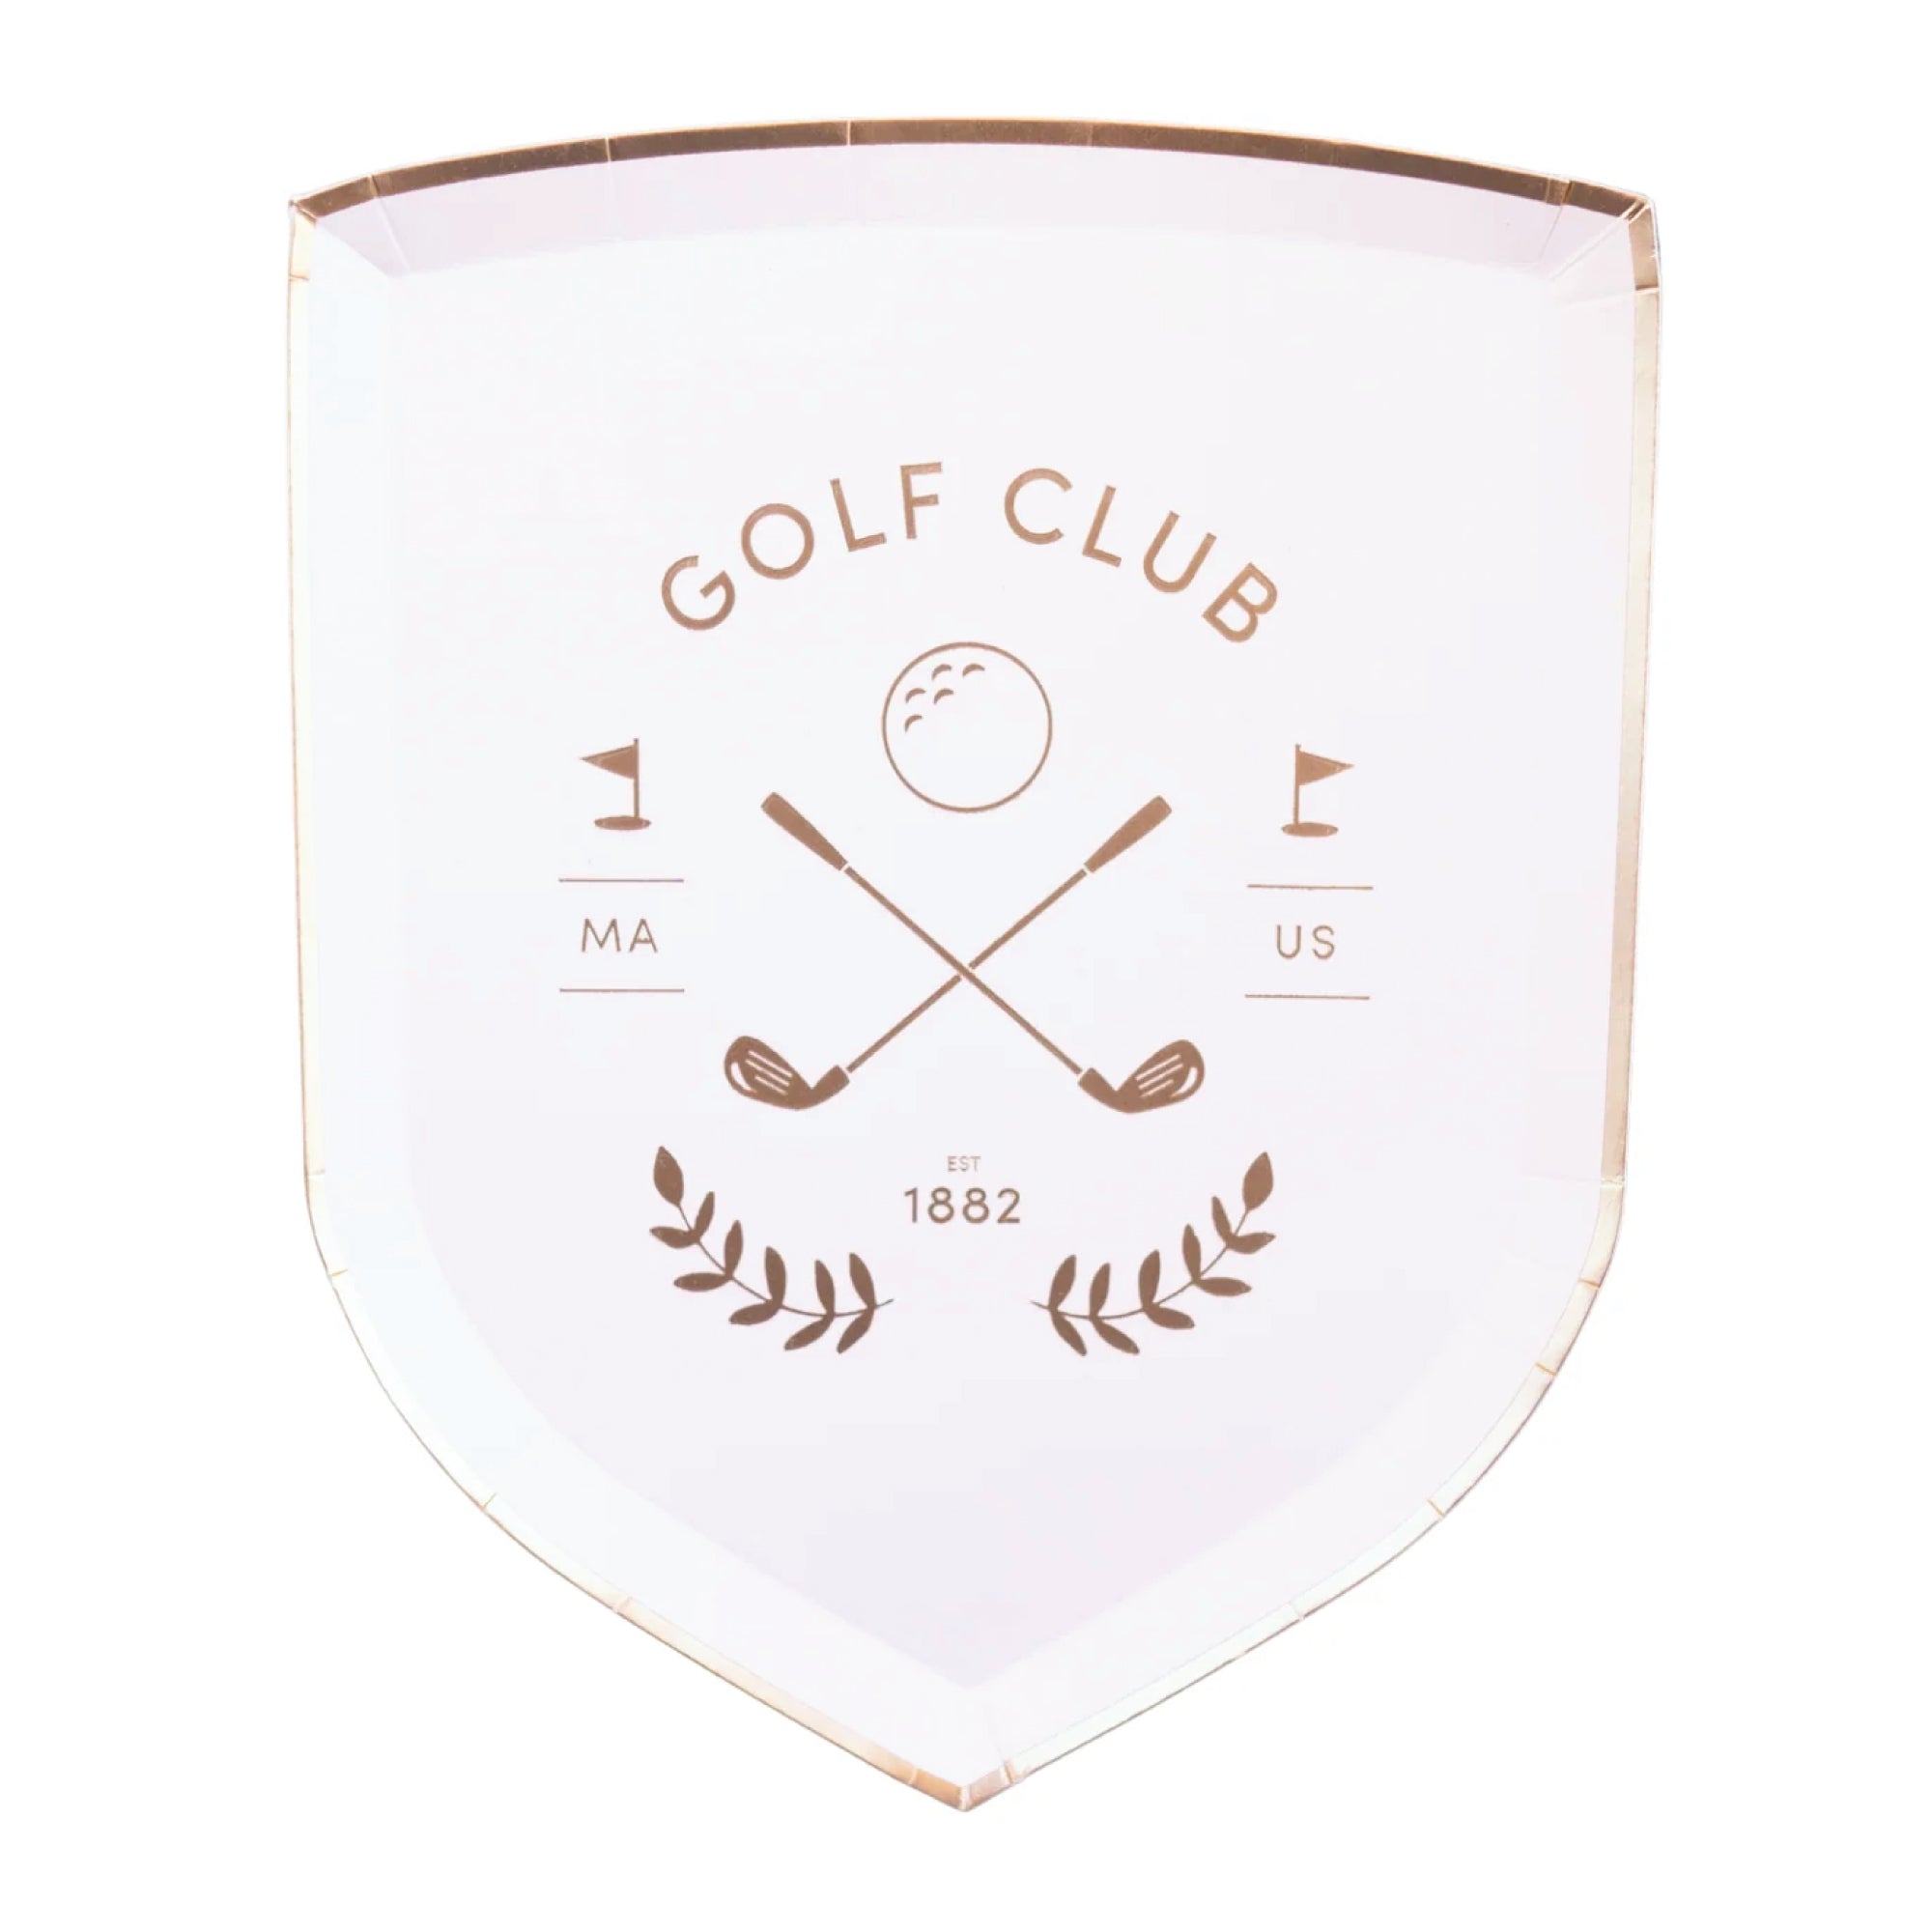 Golf Club Dessert Plates 8ct | The Party Darling